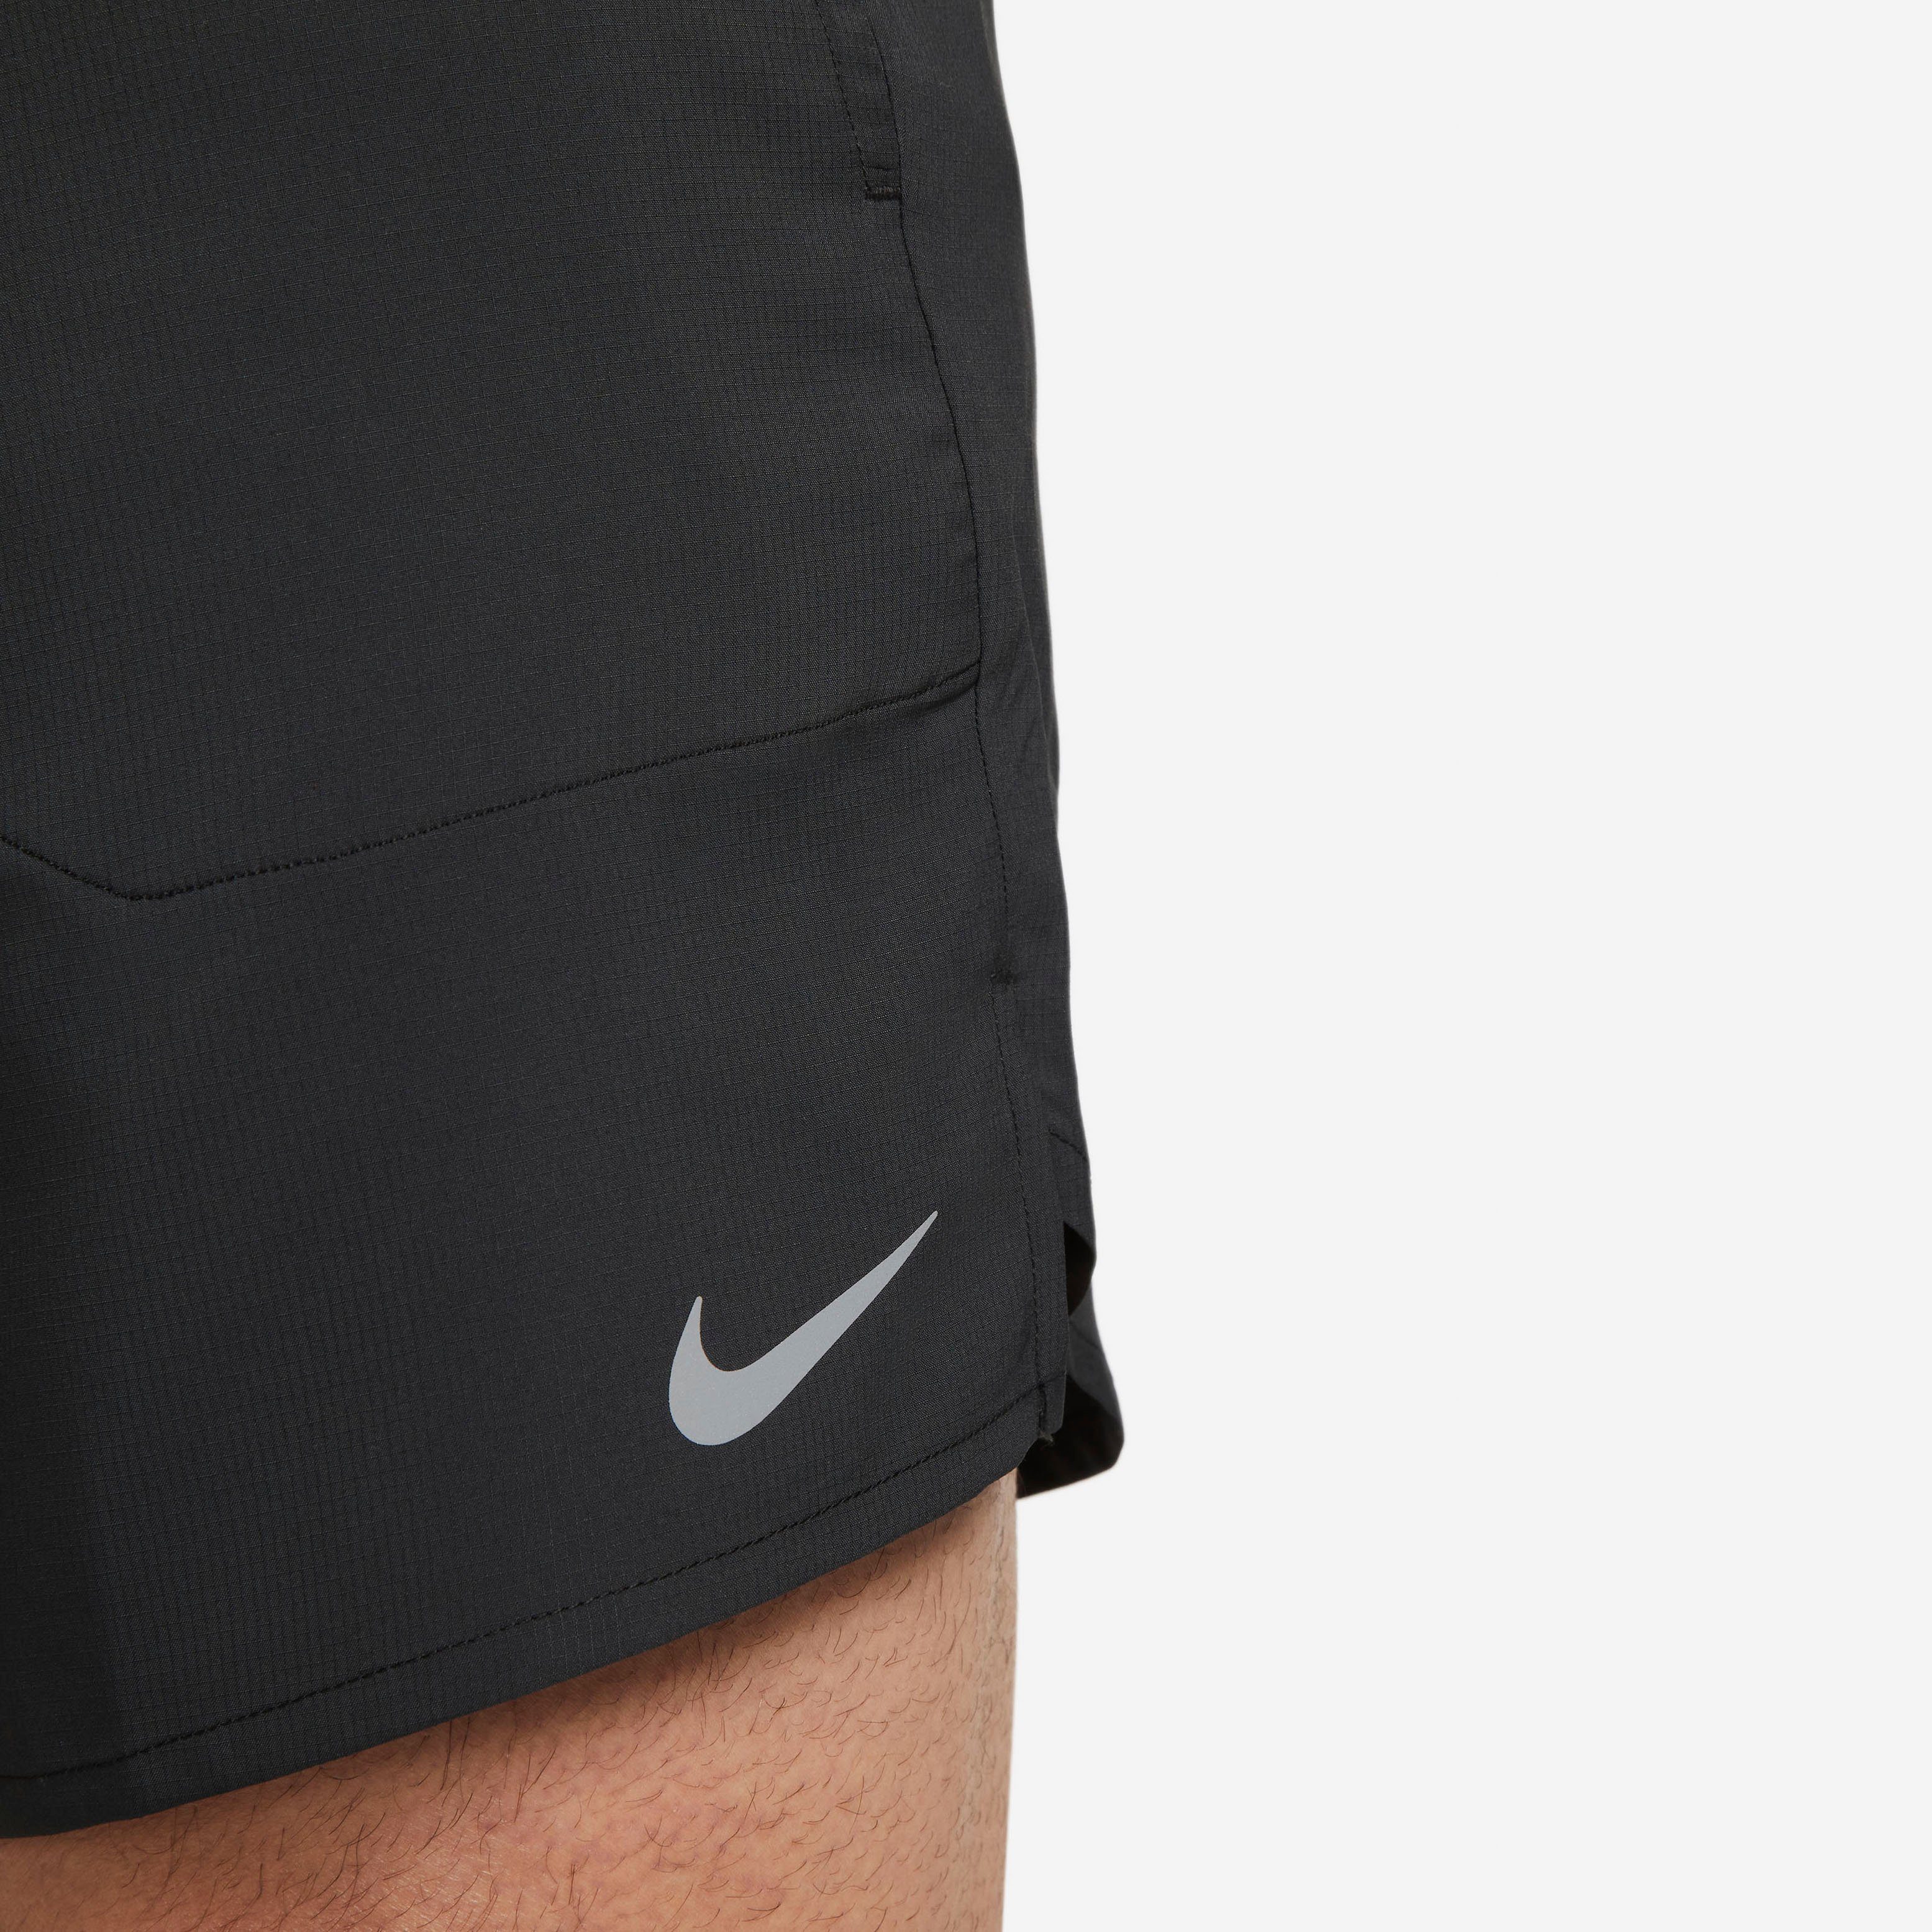 Dri-FIT Men's Nike Shorts Brief-Lined " Stride Running Laufshorts